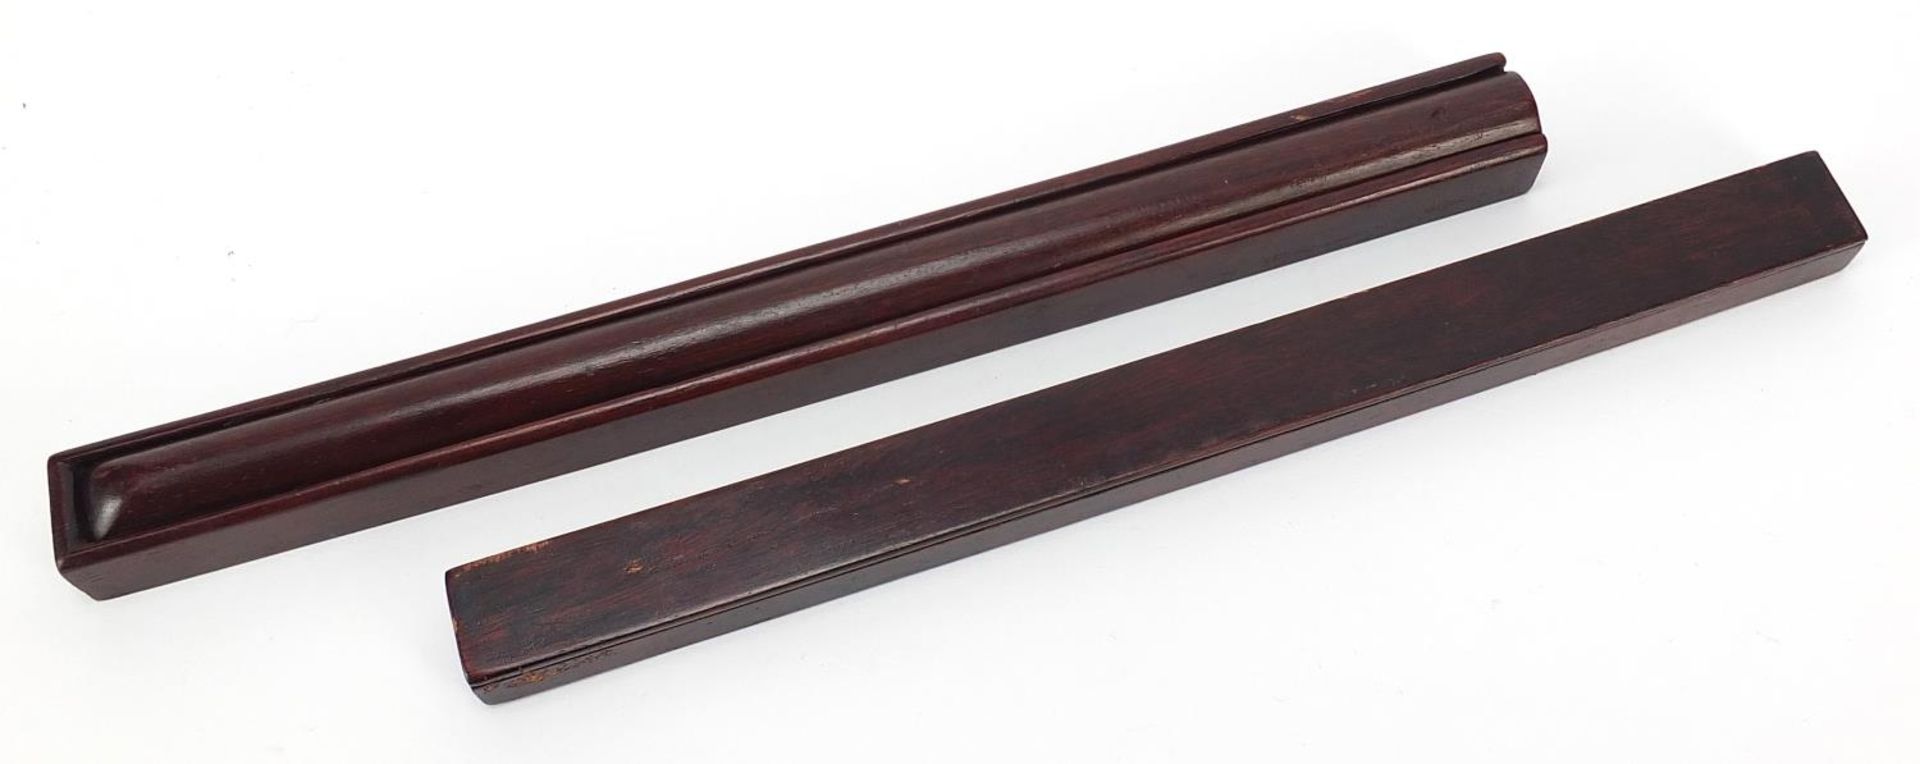 Two pairs of Chinese chop sticks with hardwood cases, the cases 30cm in length - Image 5 of 5